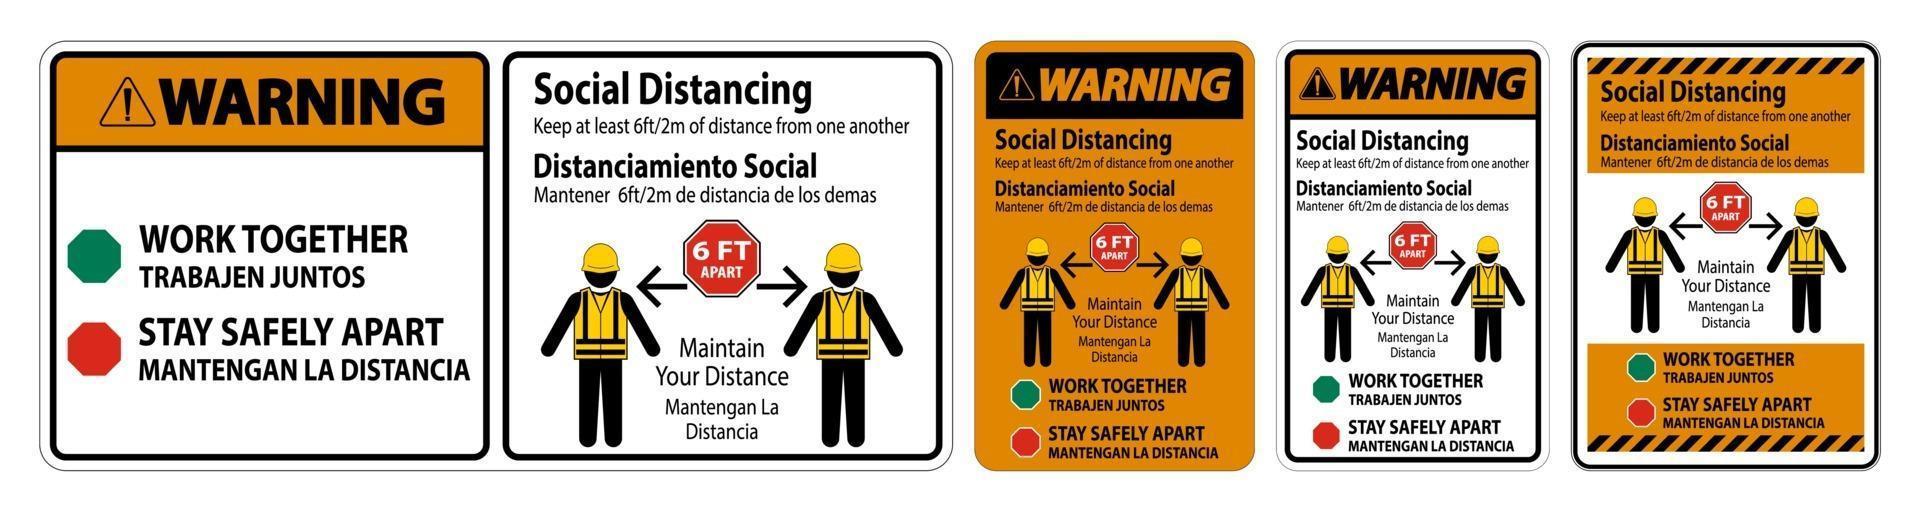 Warning Bilingual Social Distancing Construction Sign Isolate On White Background vector